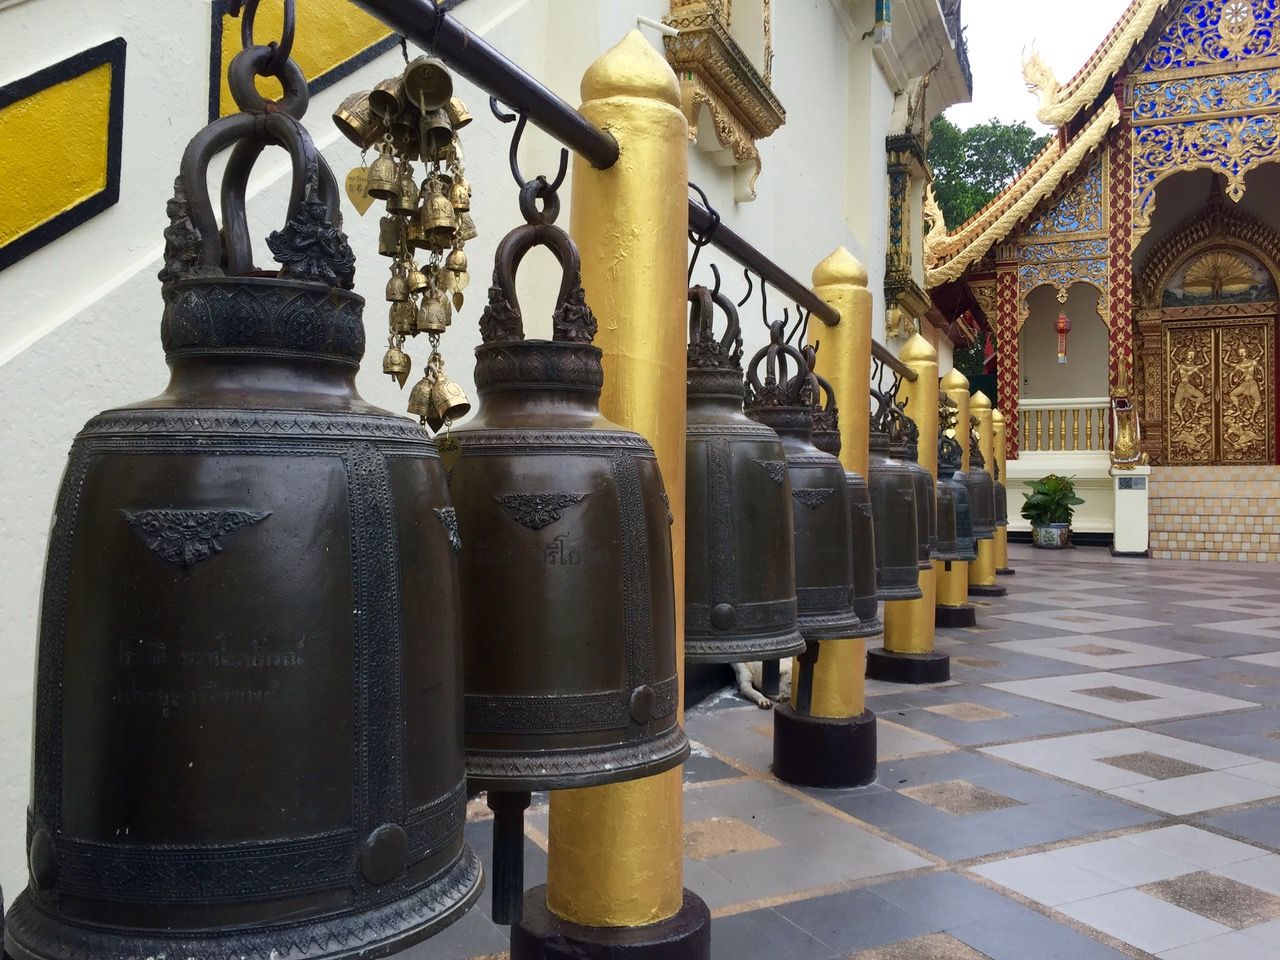 A line of bells with black and gold adornment.